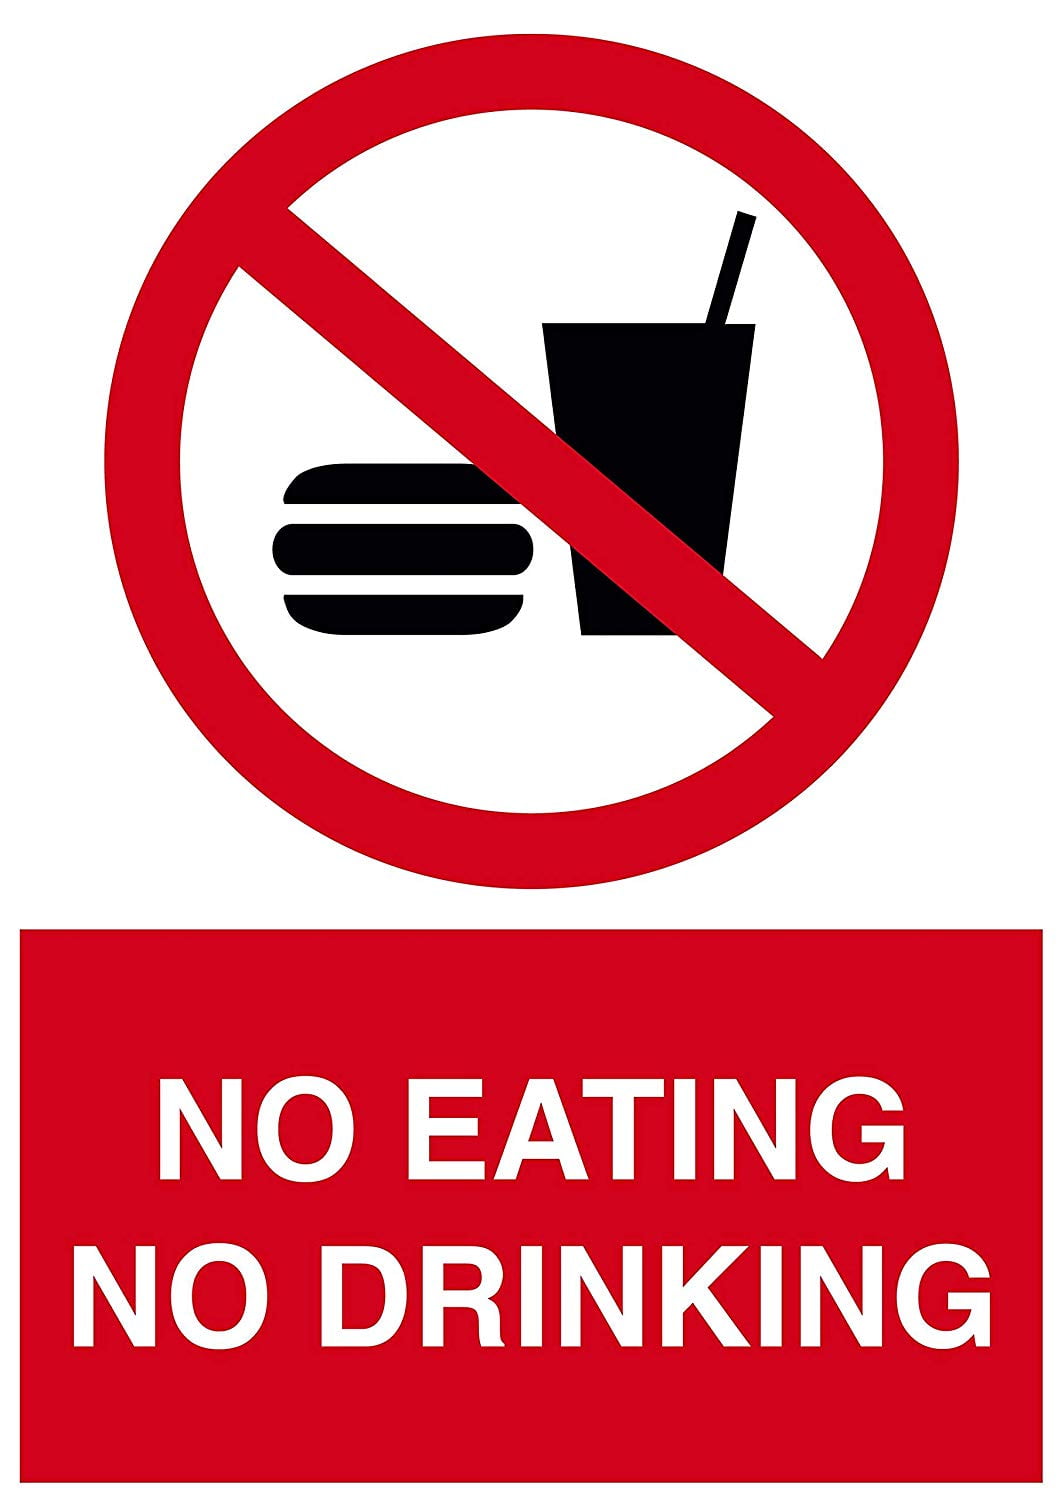 vinyl-stickers-bundle-safety-and-warning-signs-stickers-no-eating